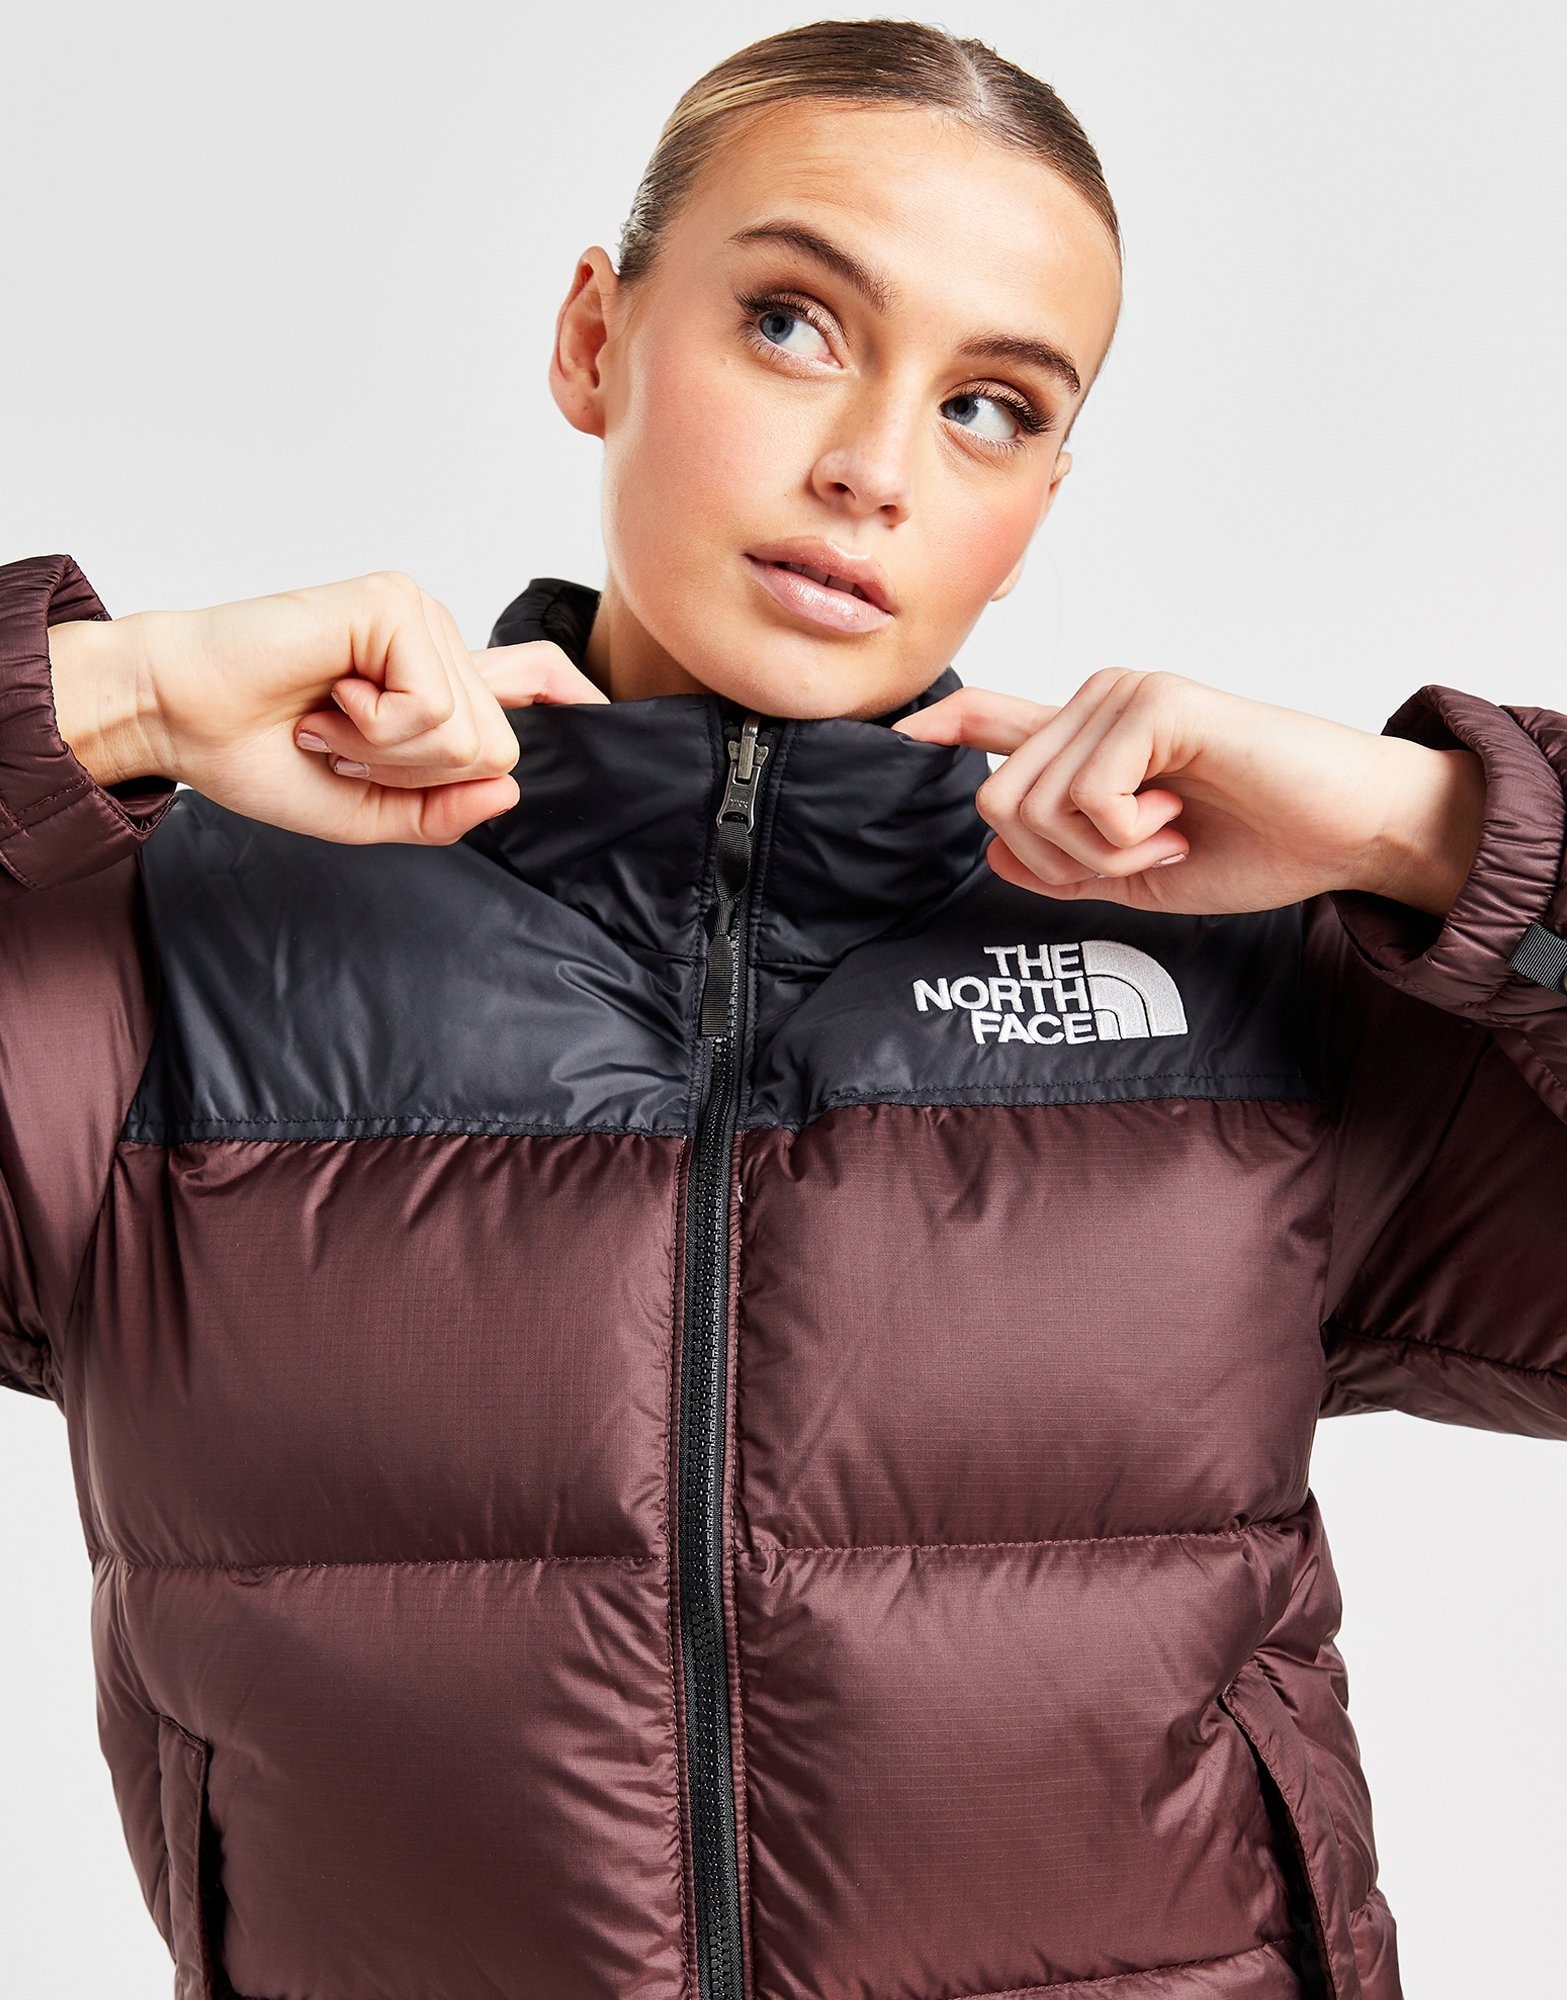 The North Face is 40% off with CODE FLASH40